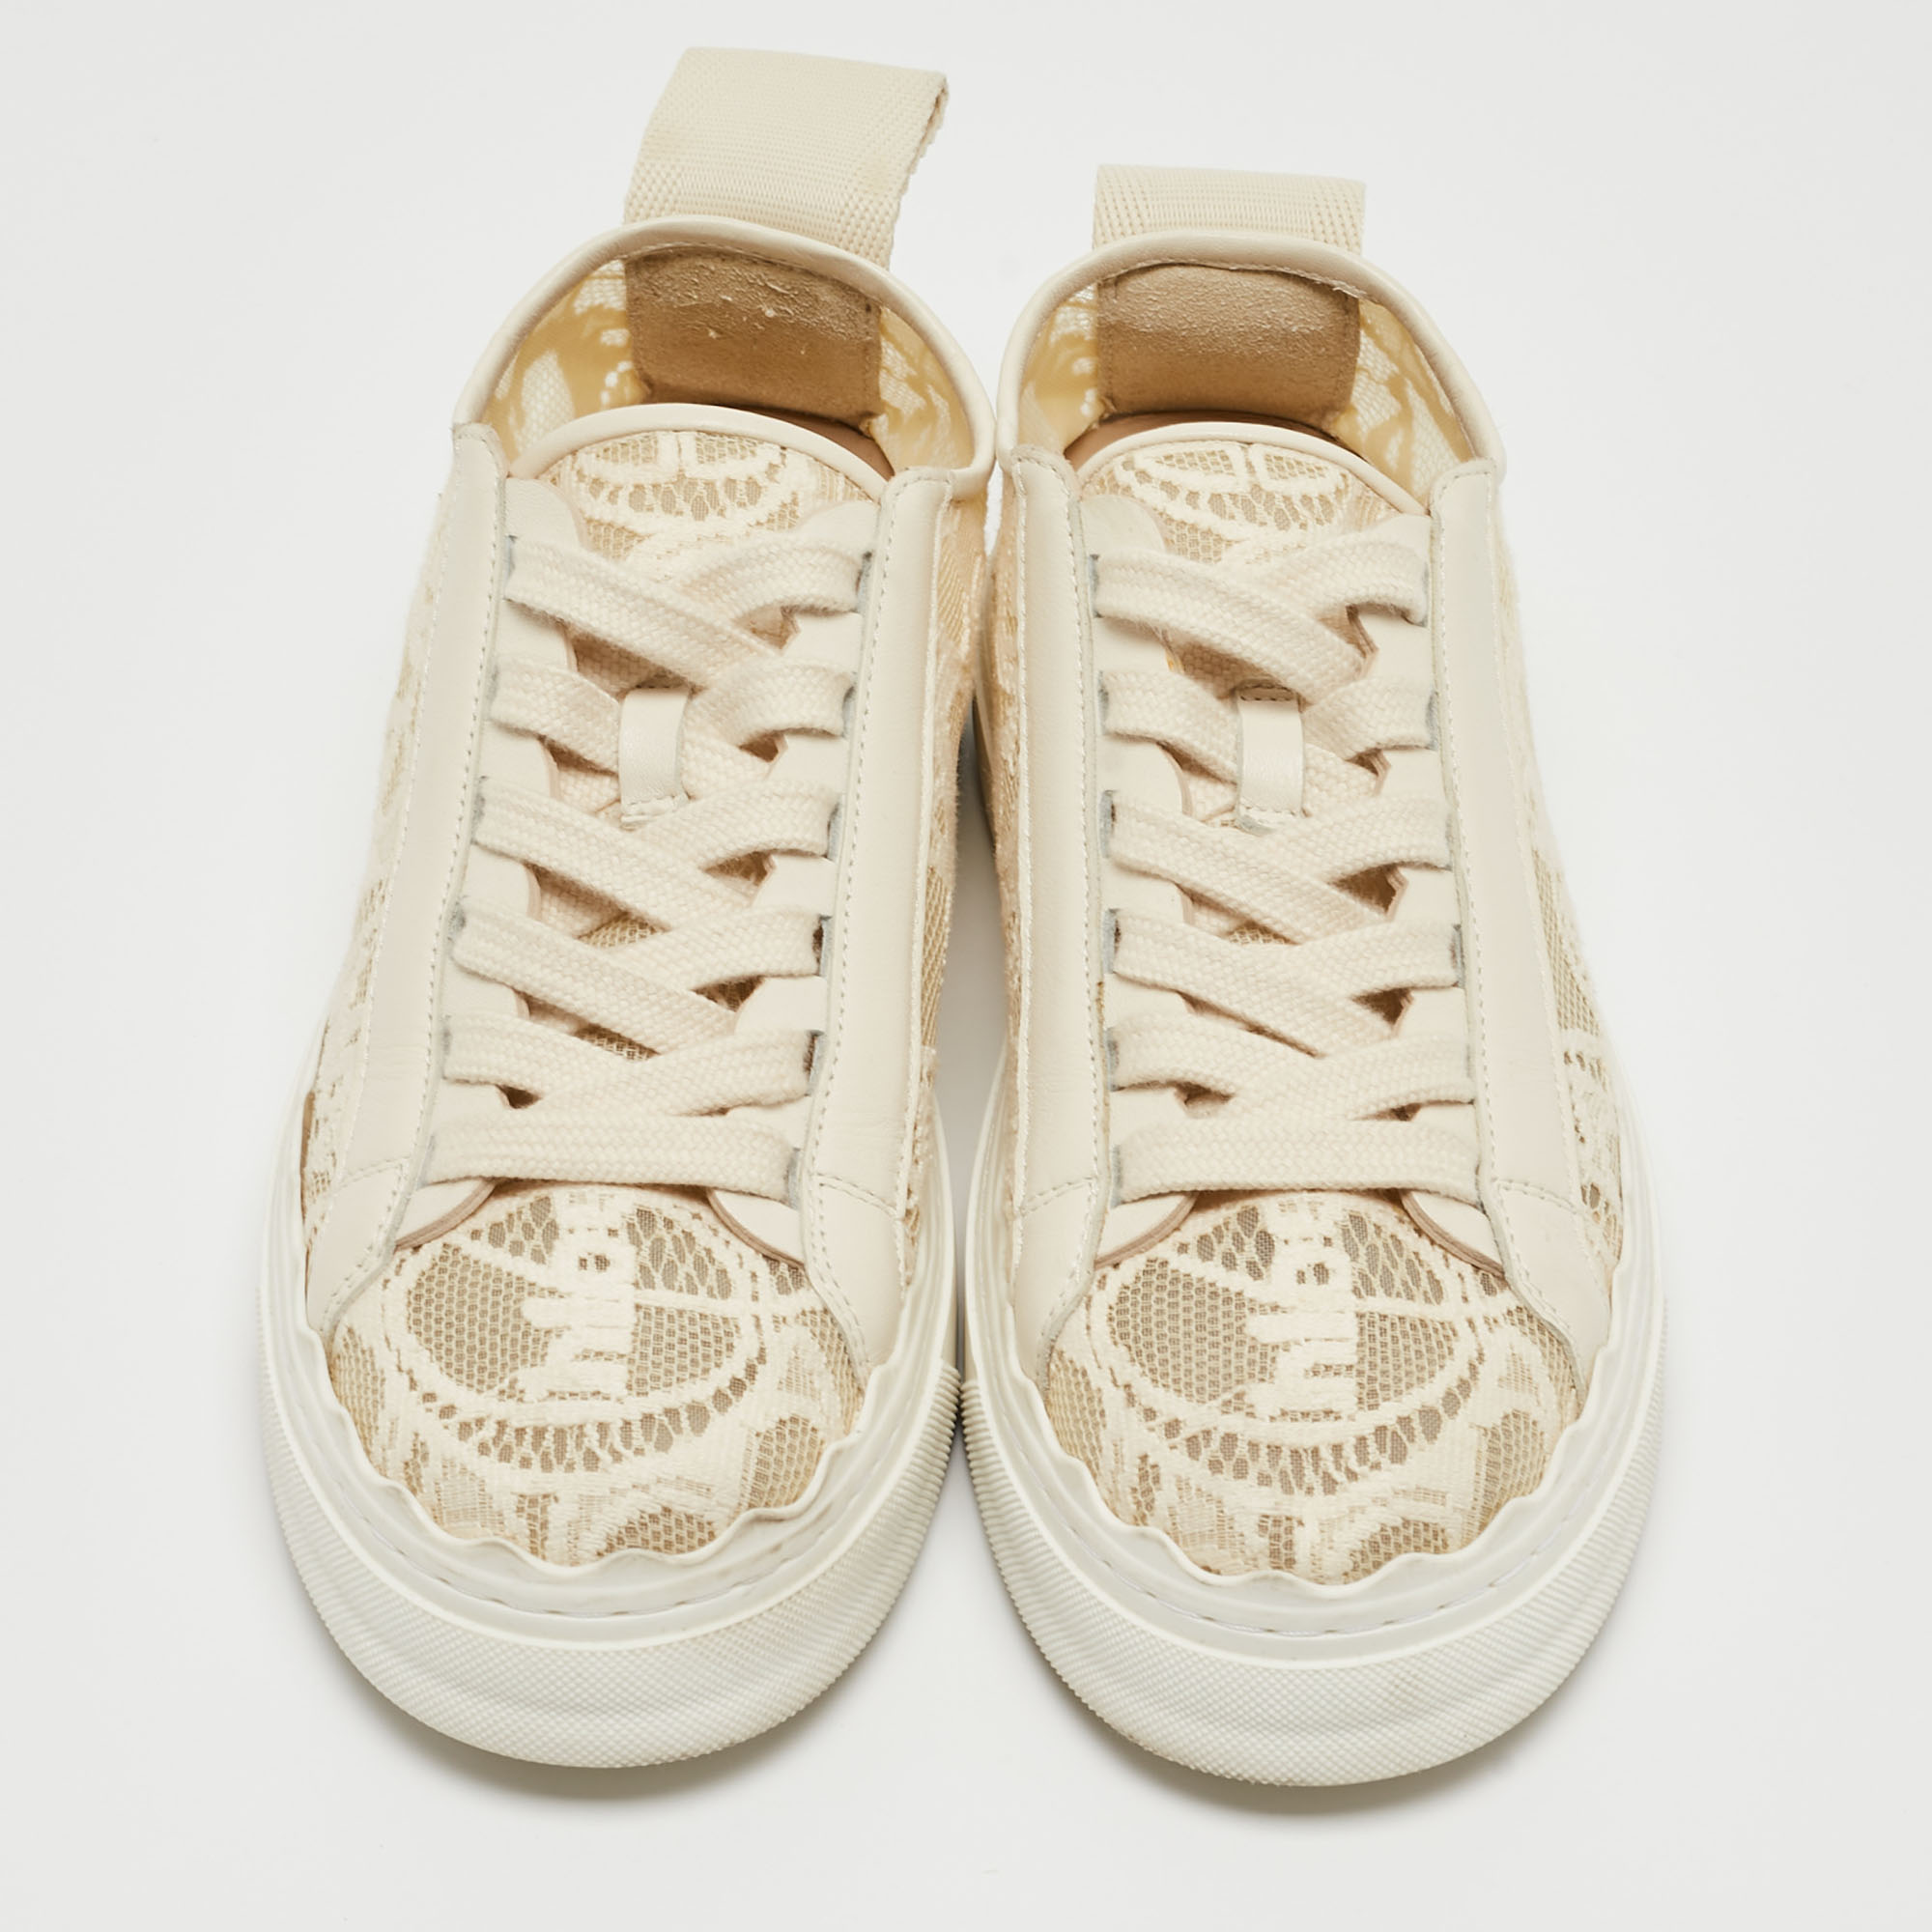 Chloe Cream Lace And Leather Lauren Lace Up Sneakers Size 36